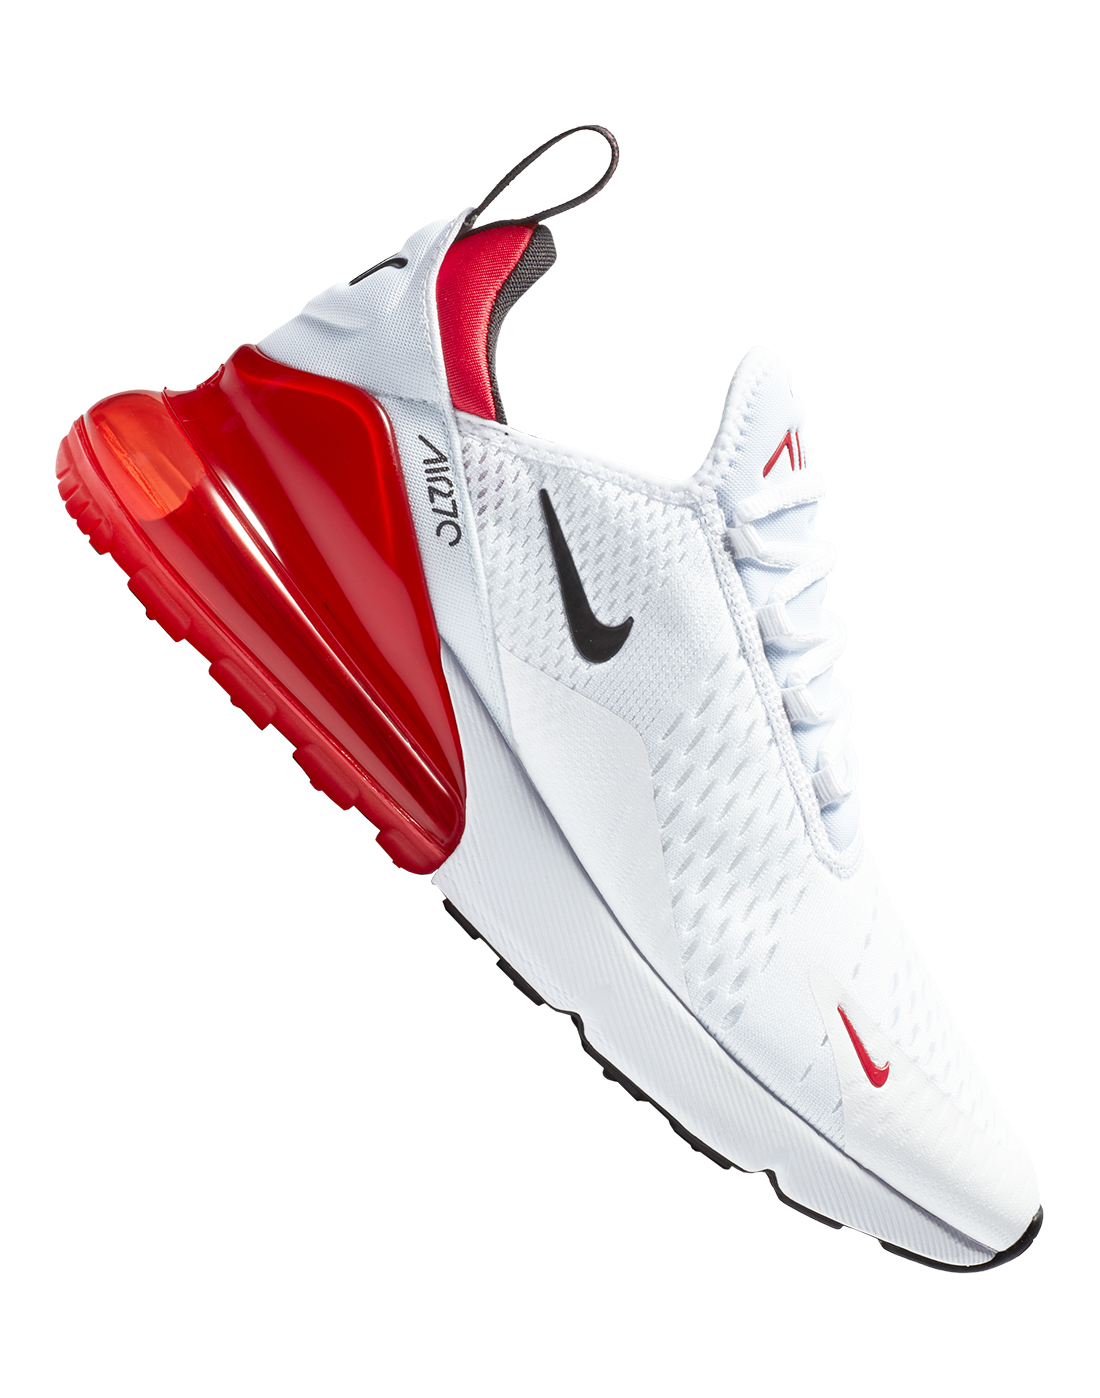 red and white air 270